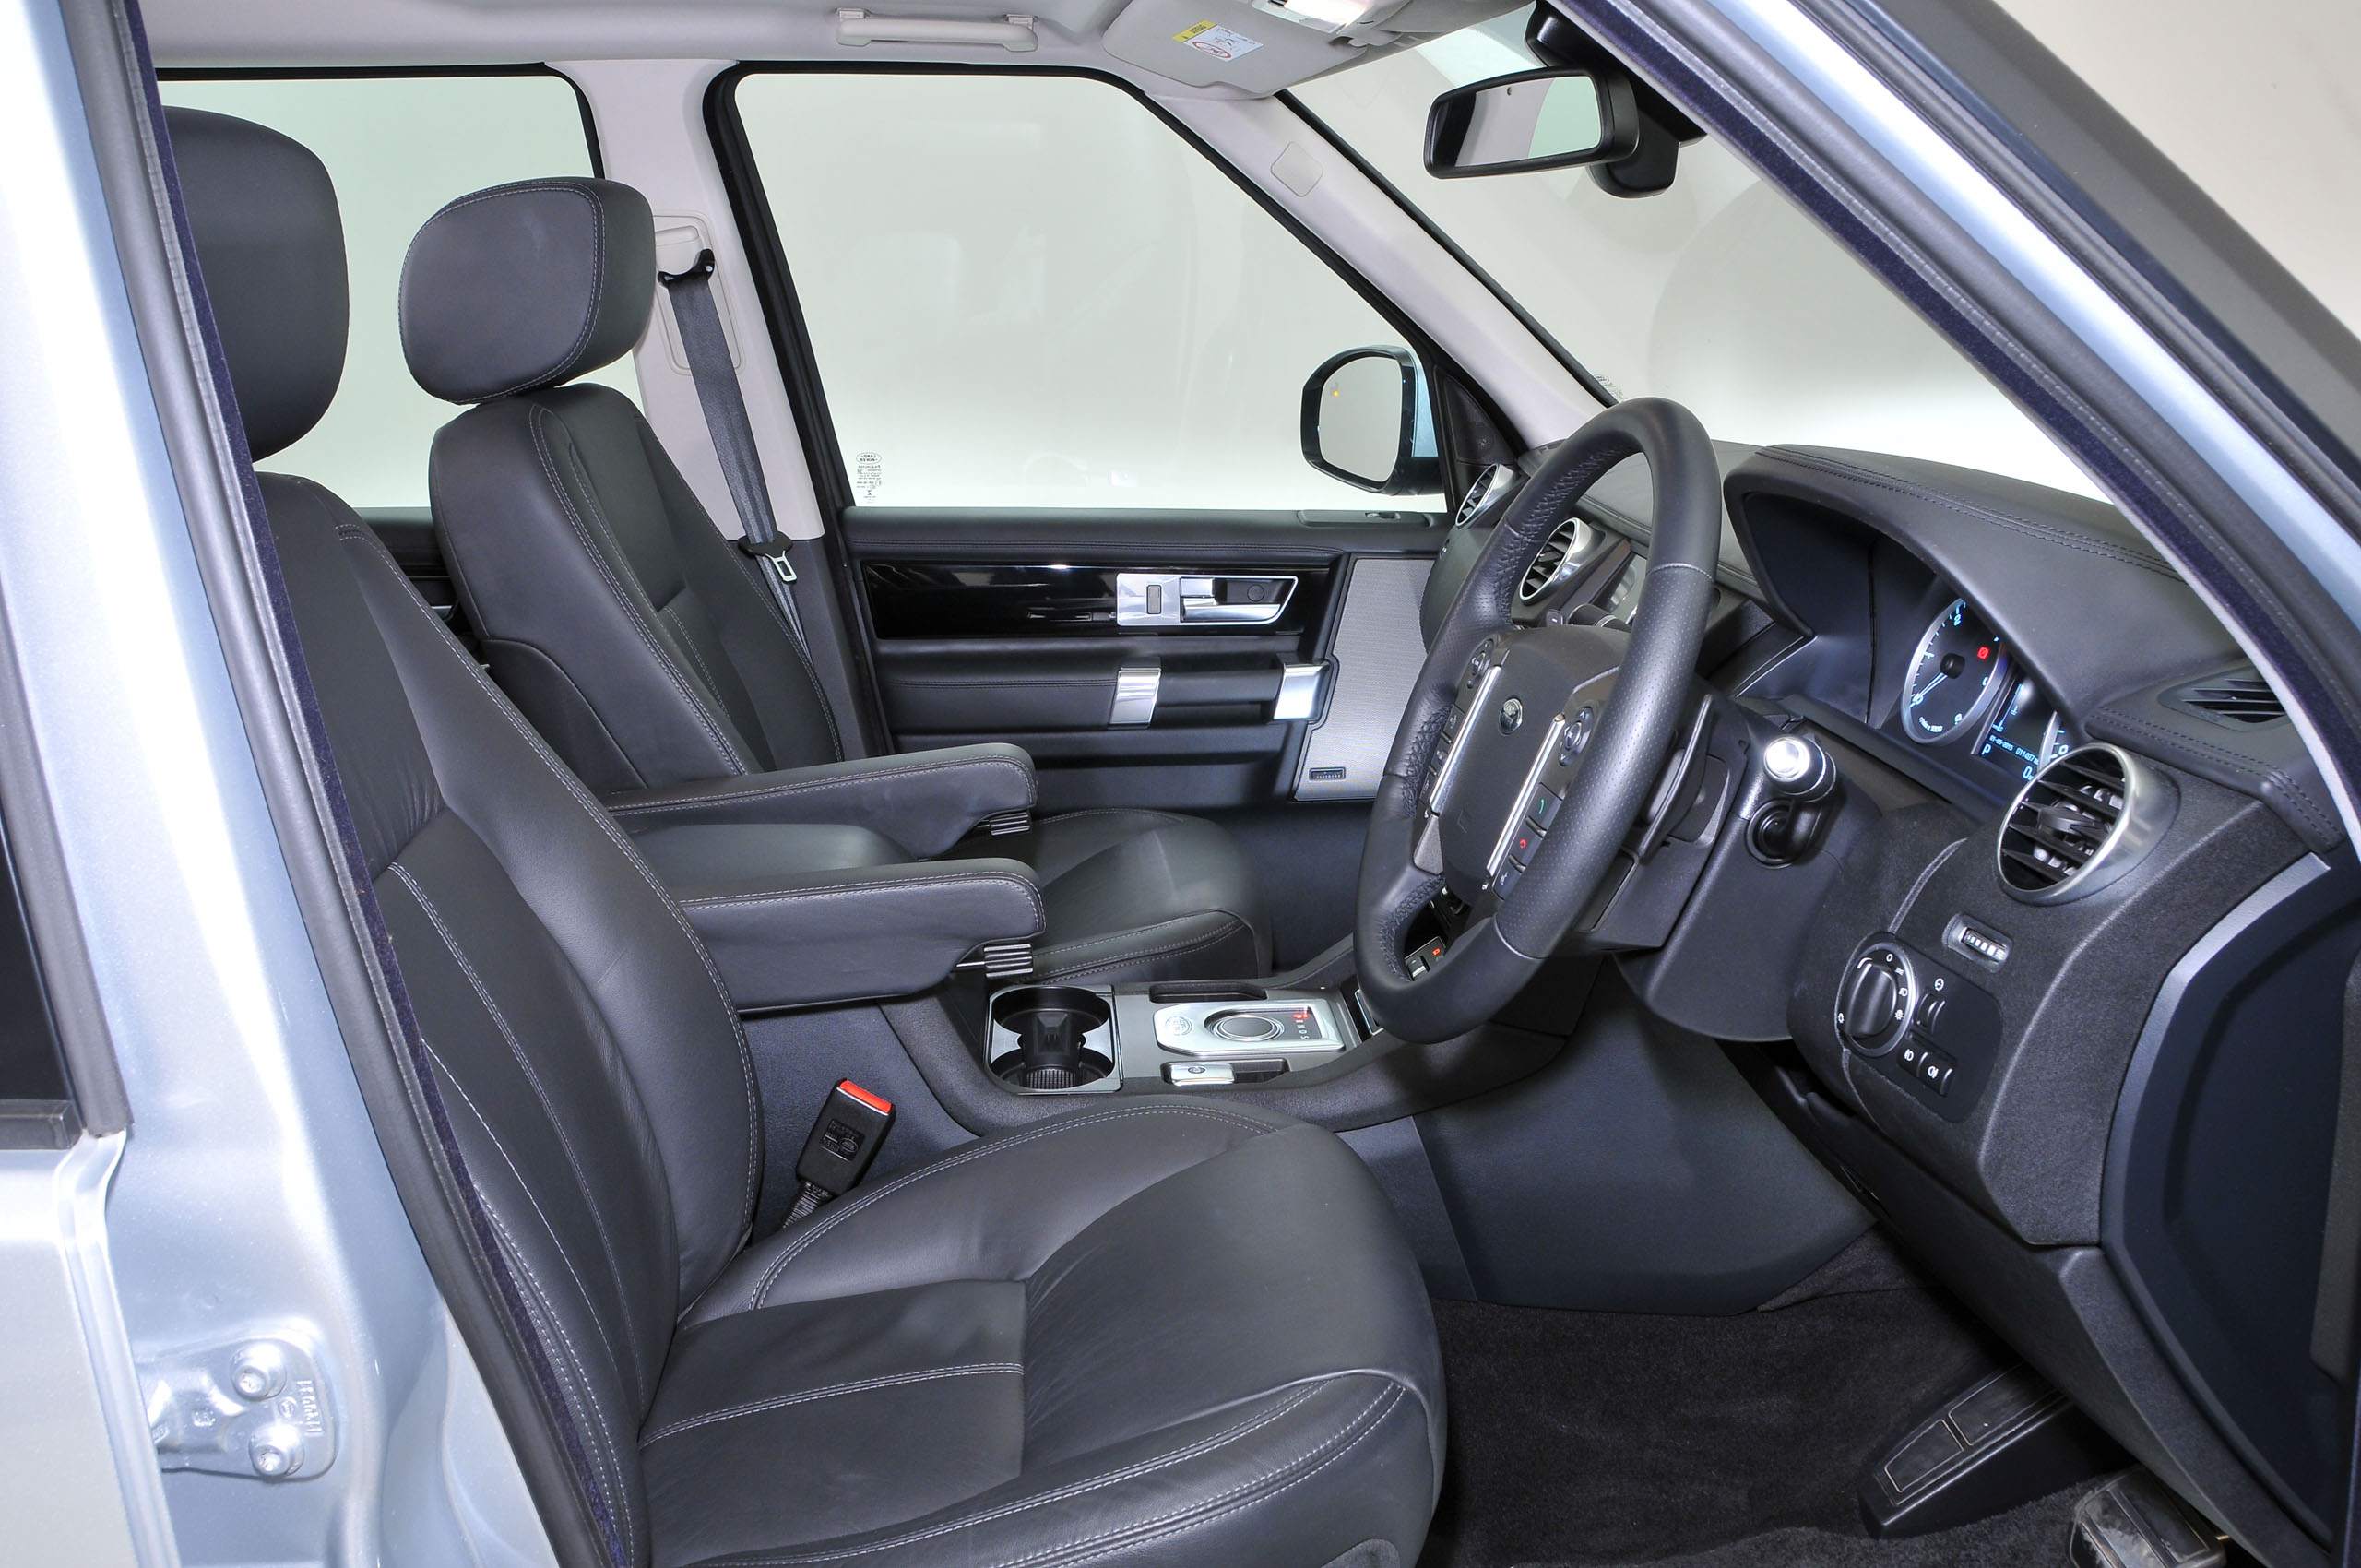 Land Rover Discovery interior